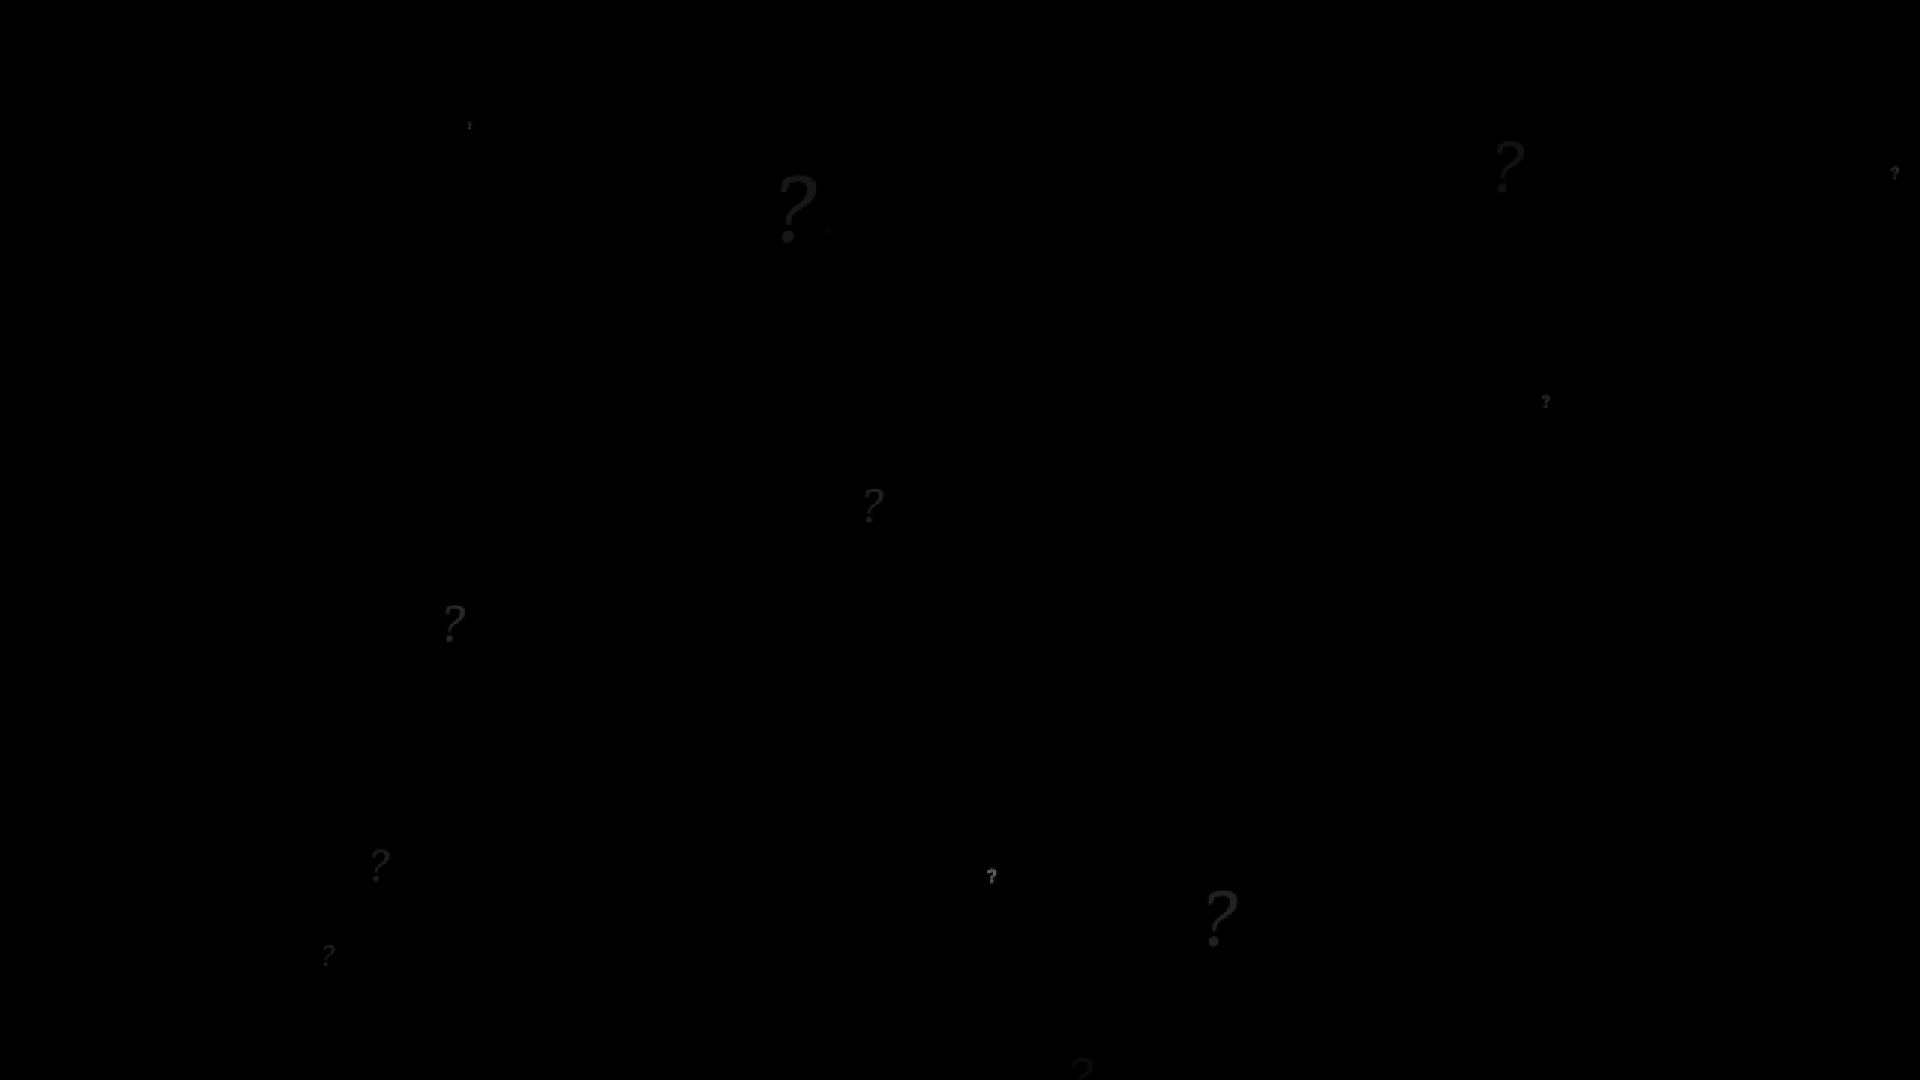 GIF of question marks floating in space